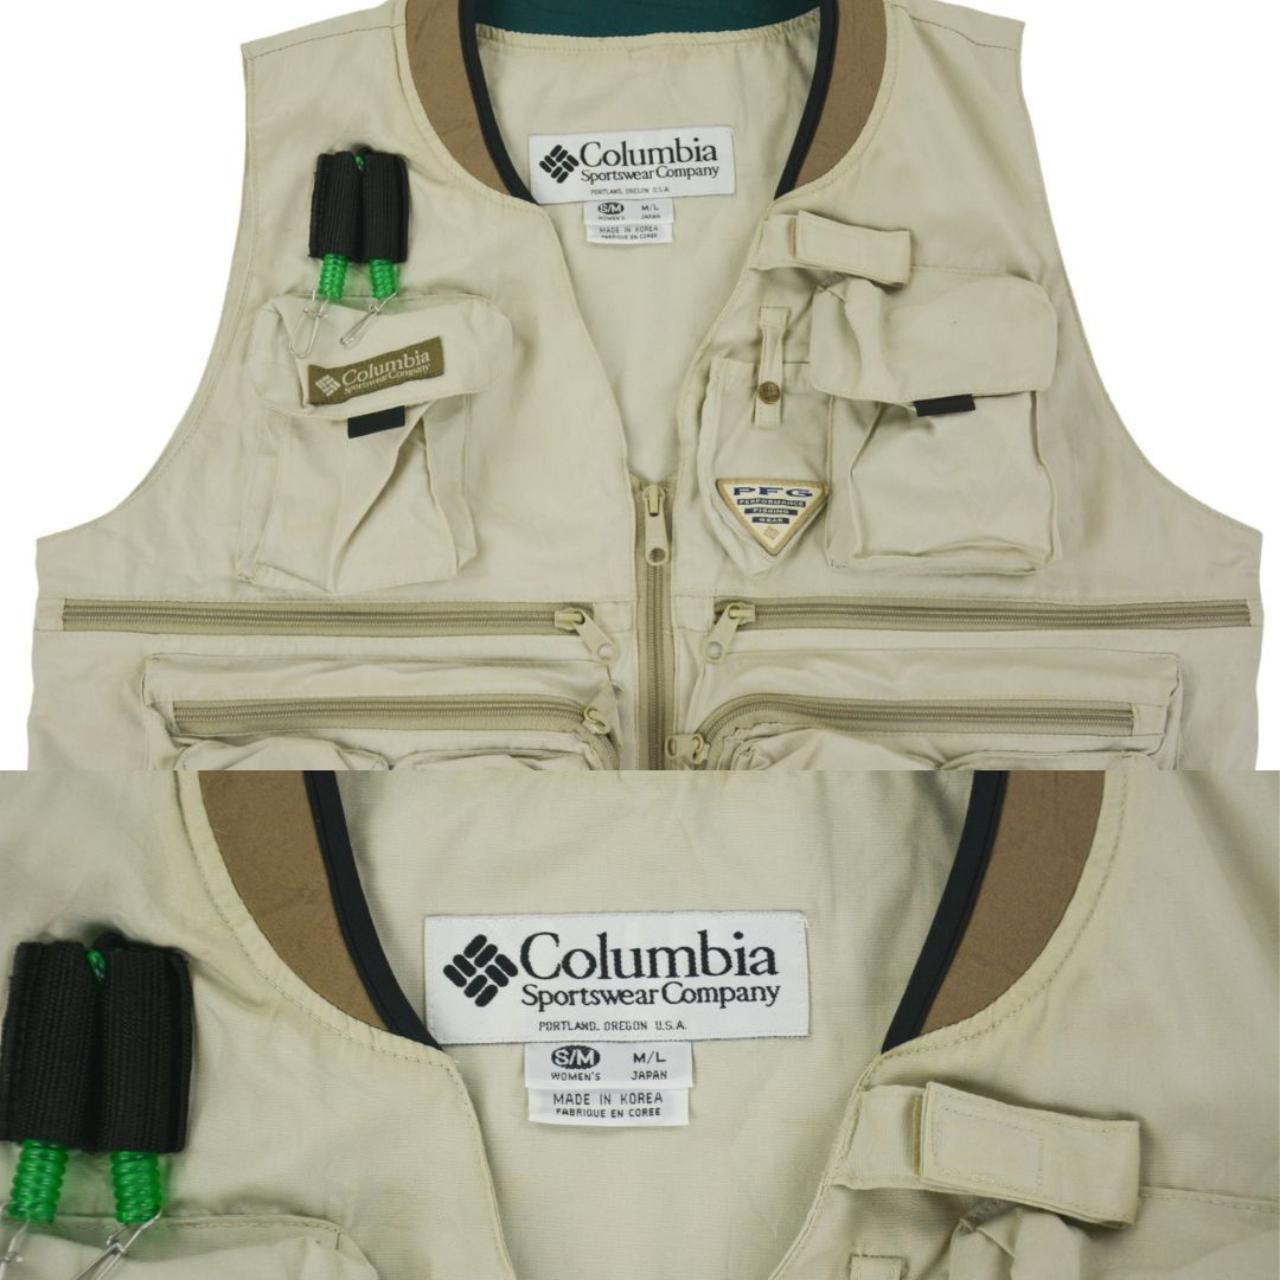 Vintage Columbia Performance Fishing Gear by Columbia Sportwear Company Vest  